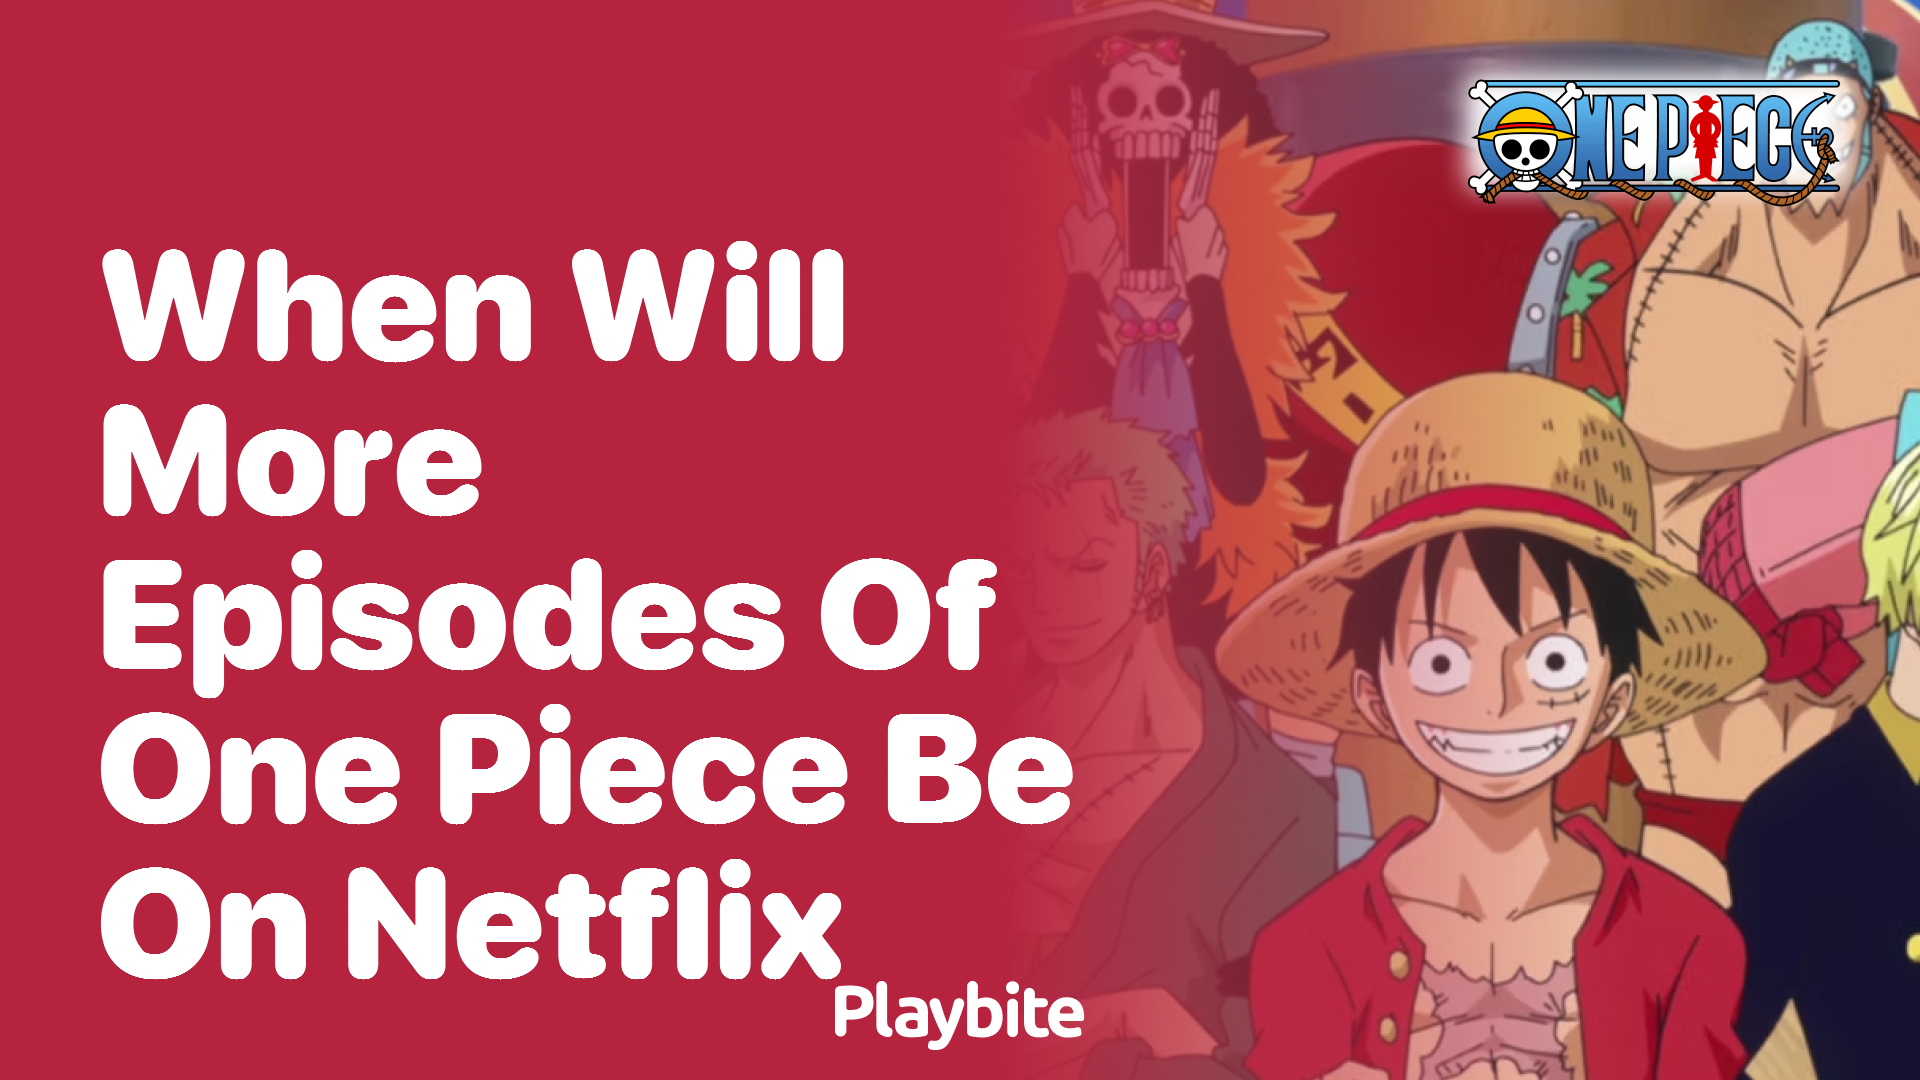 When will more episodes of One Piece be on Netflix?